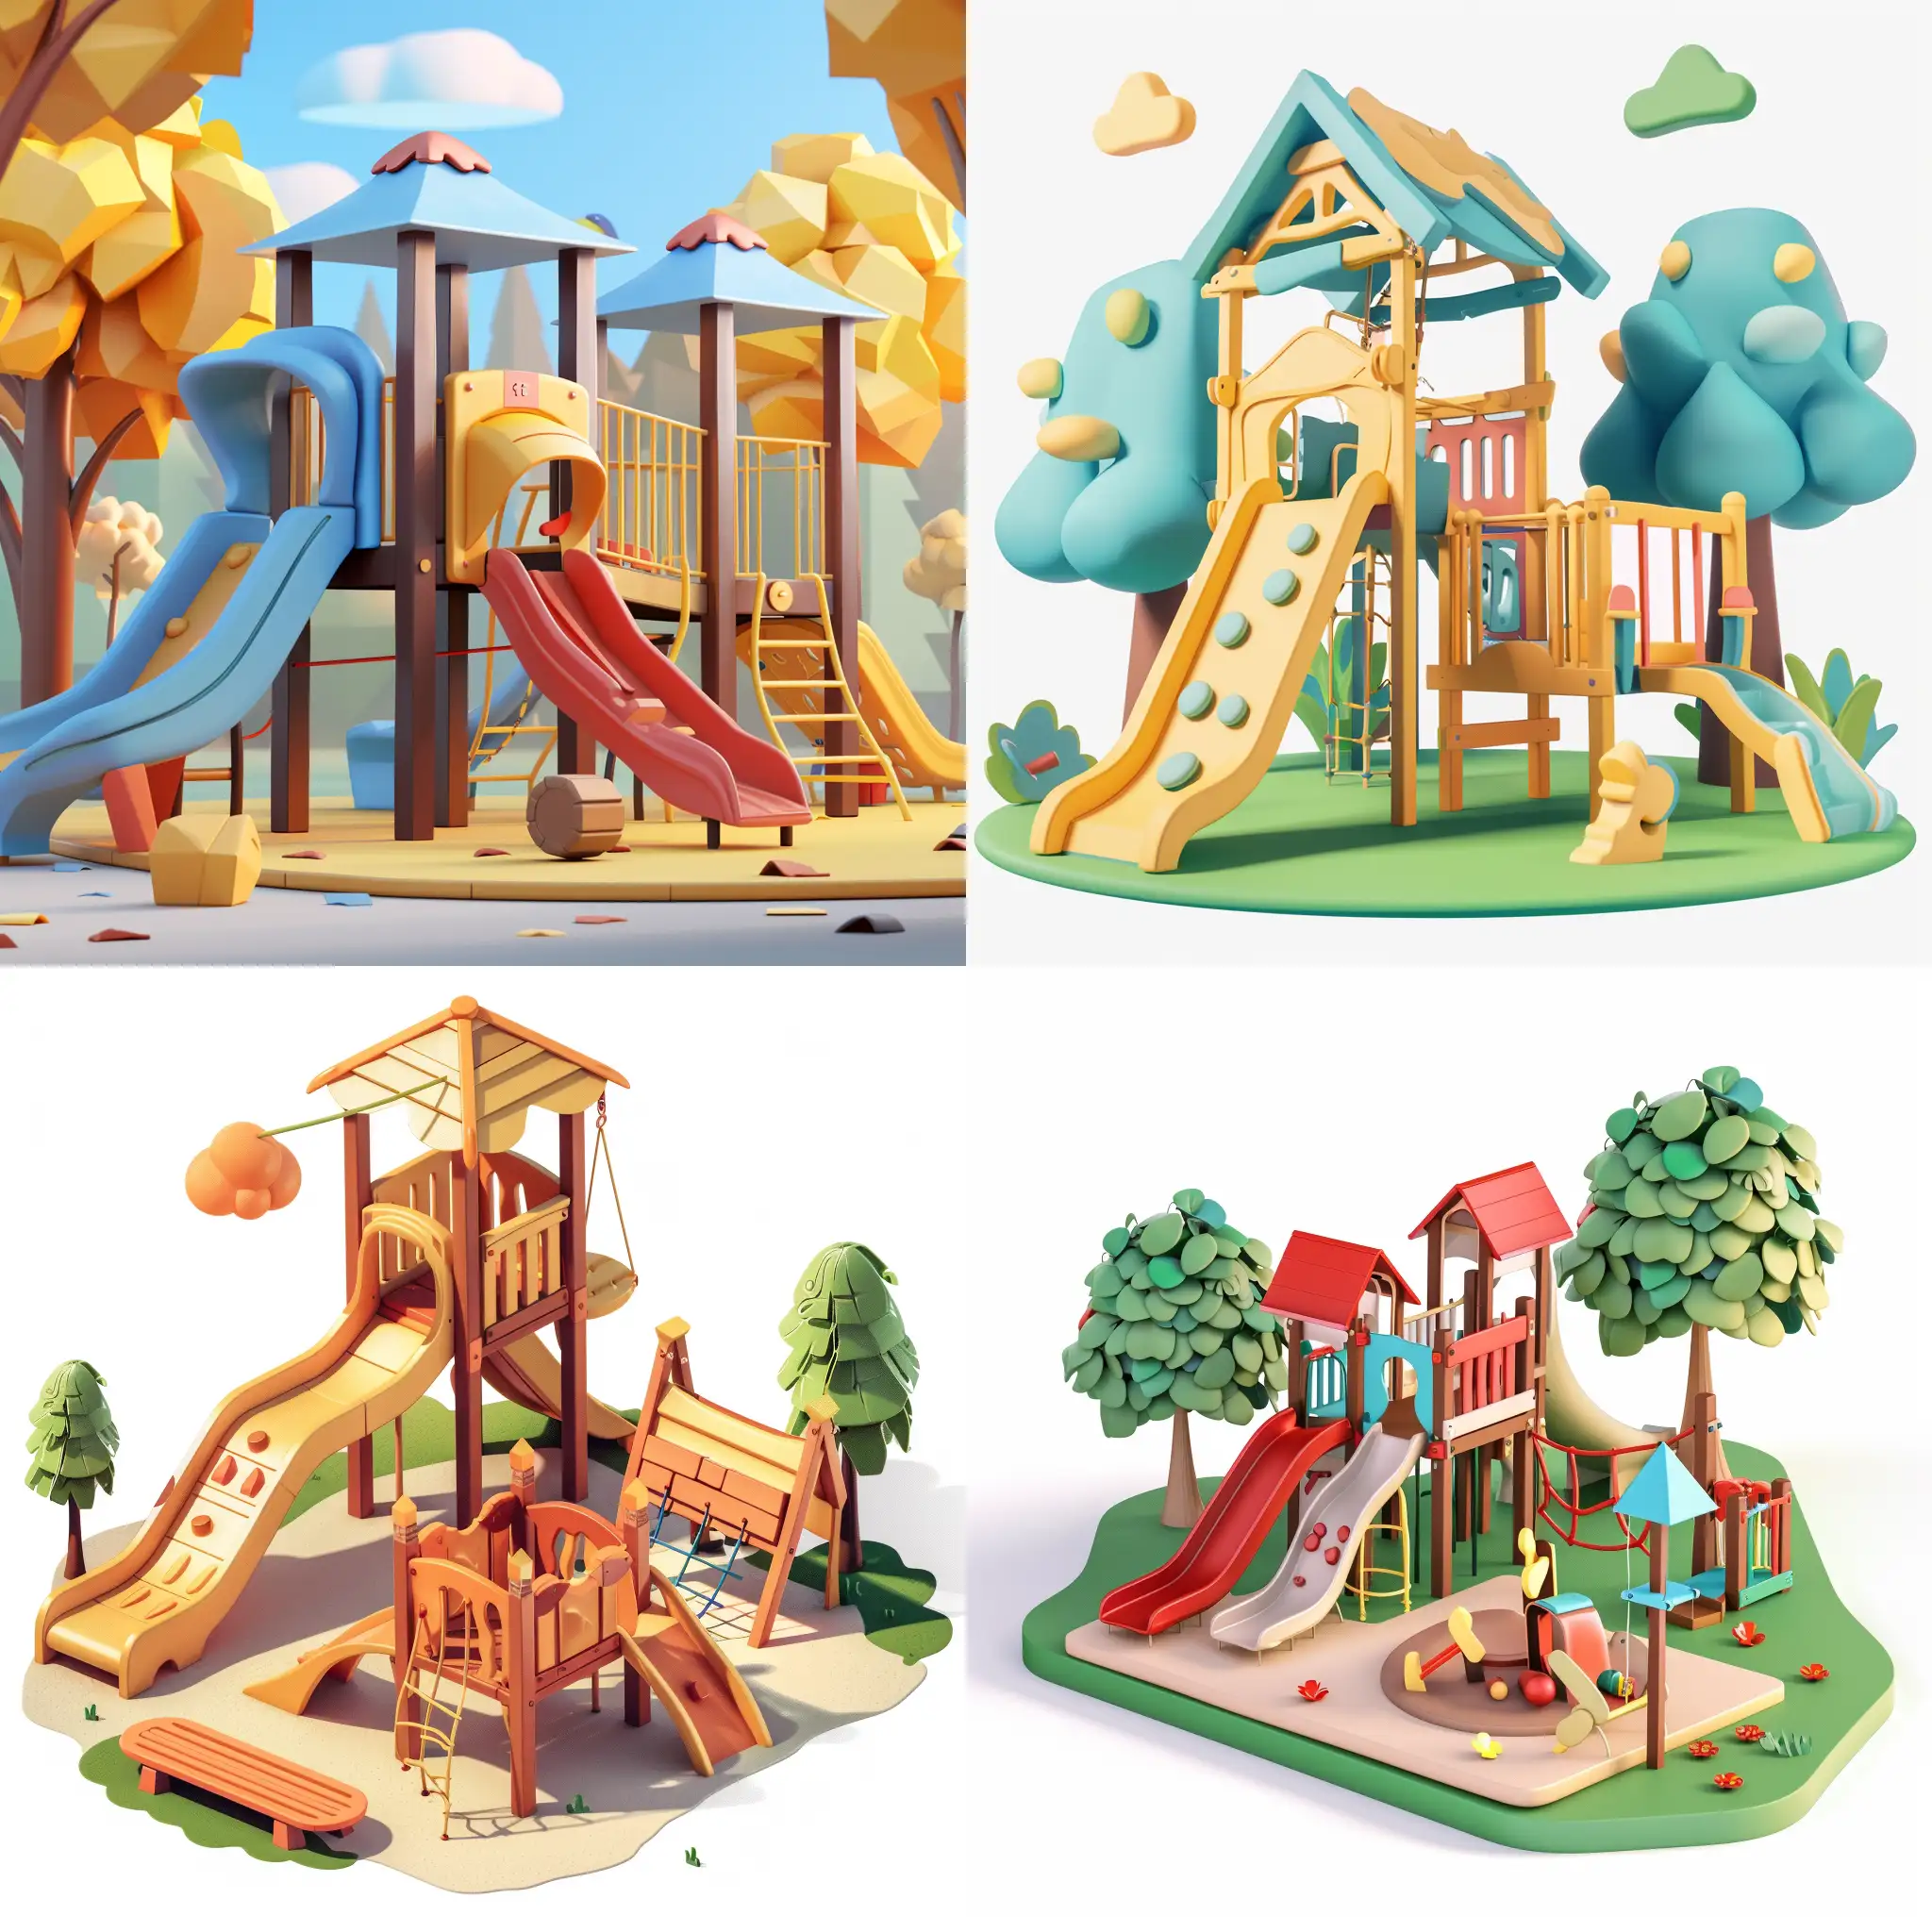 Children's playground 3D drawing style.